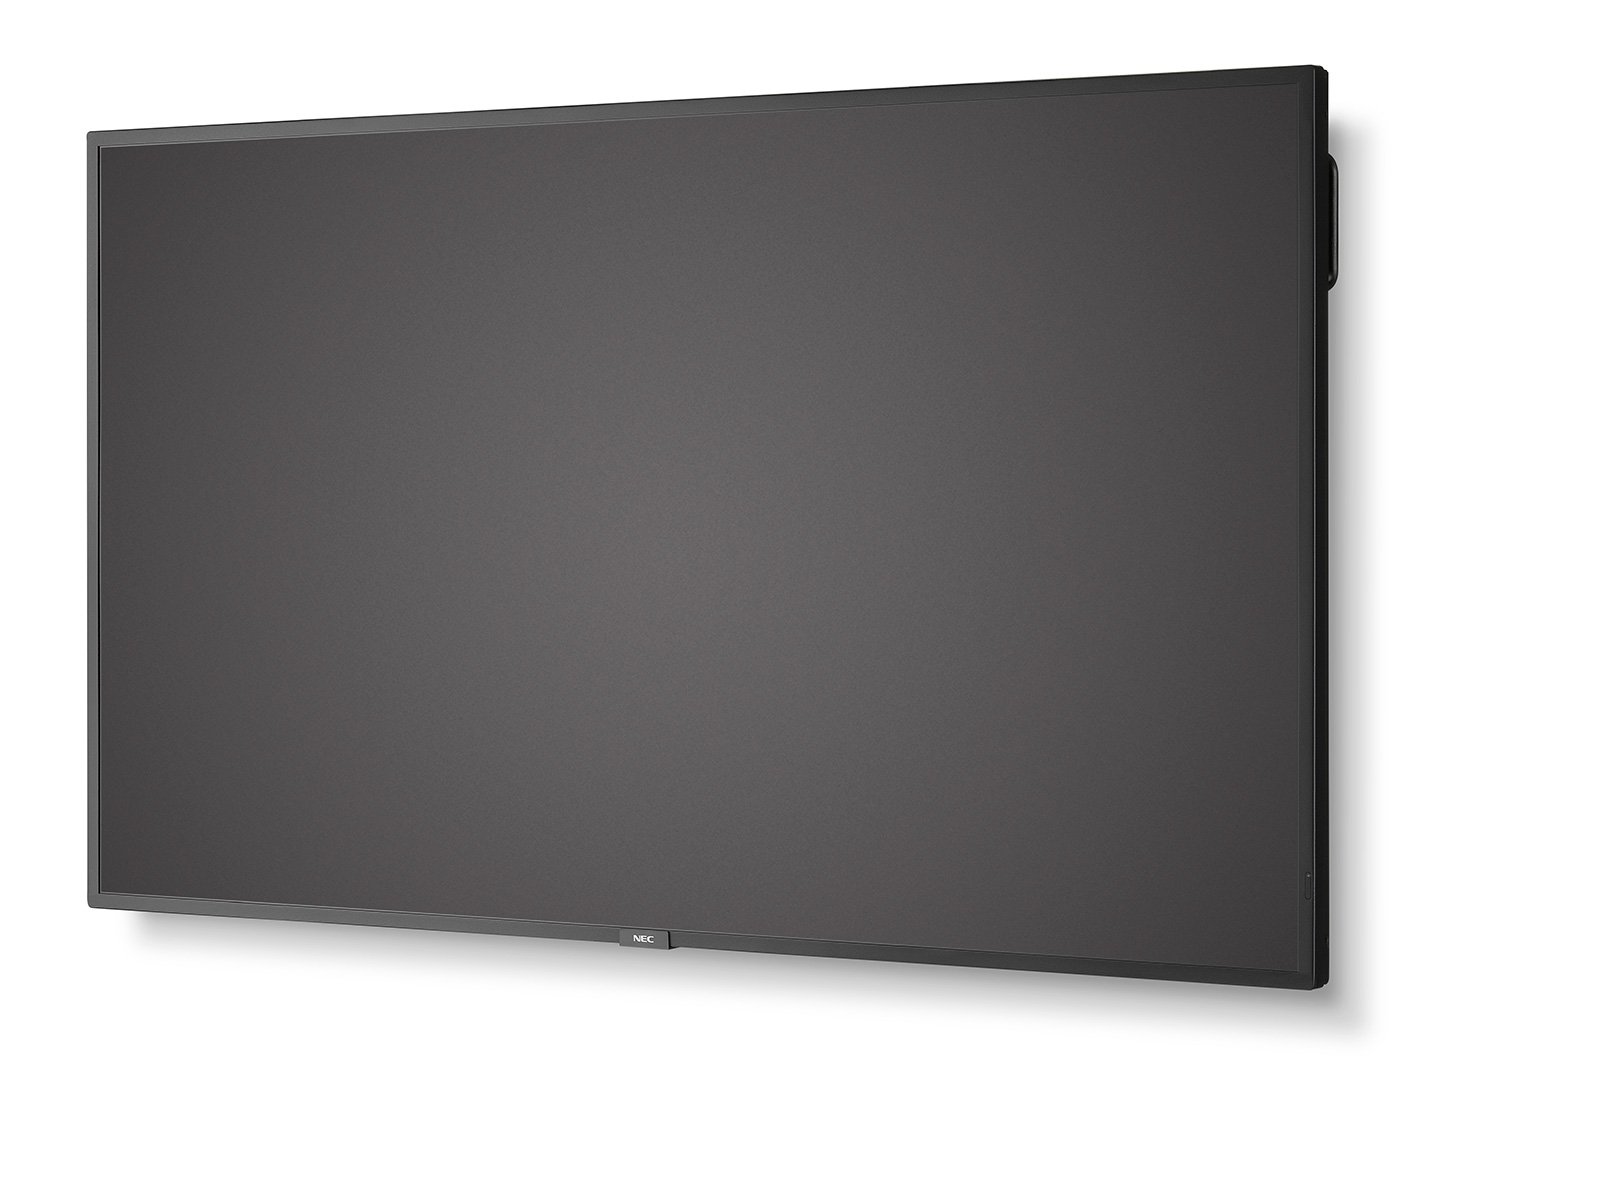 NEC MultiSync ME501 - 50 Inch - 400 cd/m² - Ultra HD - 3840x2160 Pixel - 18/7 - Message Essential Large Format Display